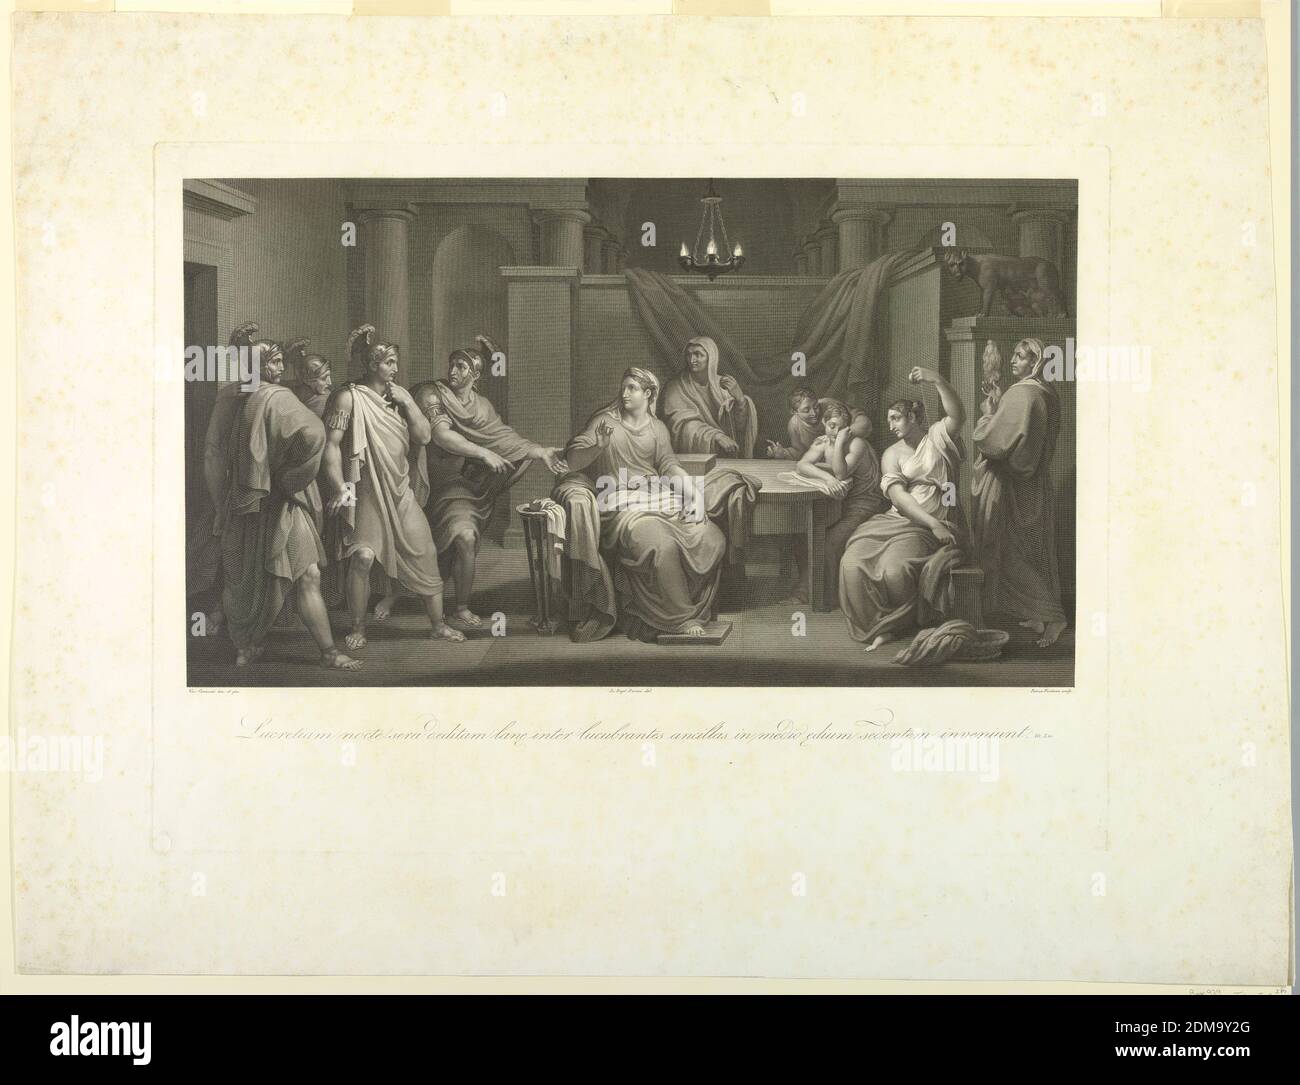 The Accusation of Lucretia, Pietro Fontana, Italian, 1762 - 1837, Vincenzo Camuccini, 1771 - 1844, Giovanni Battista Borani, Engraving on paper, In a classical interior, women are seen at their work, while four soldiers stand before them. The scene shows Hector being told of Lucretia's supposed unfaithfulness., Italy, ca. 1810-1820, Print Stock Photo